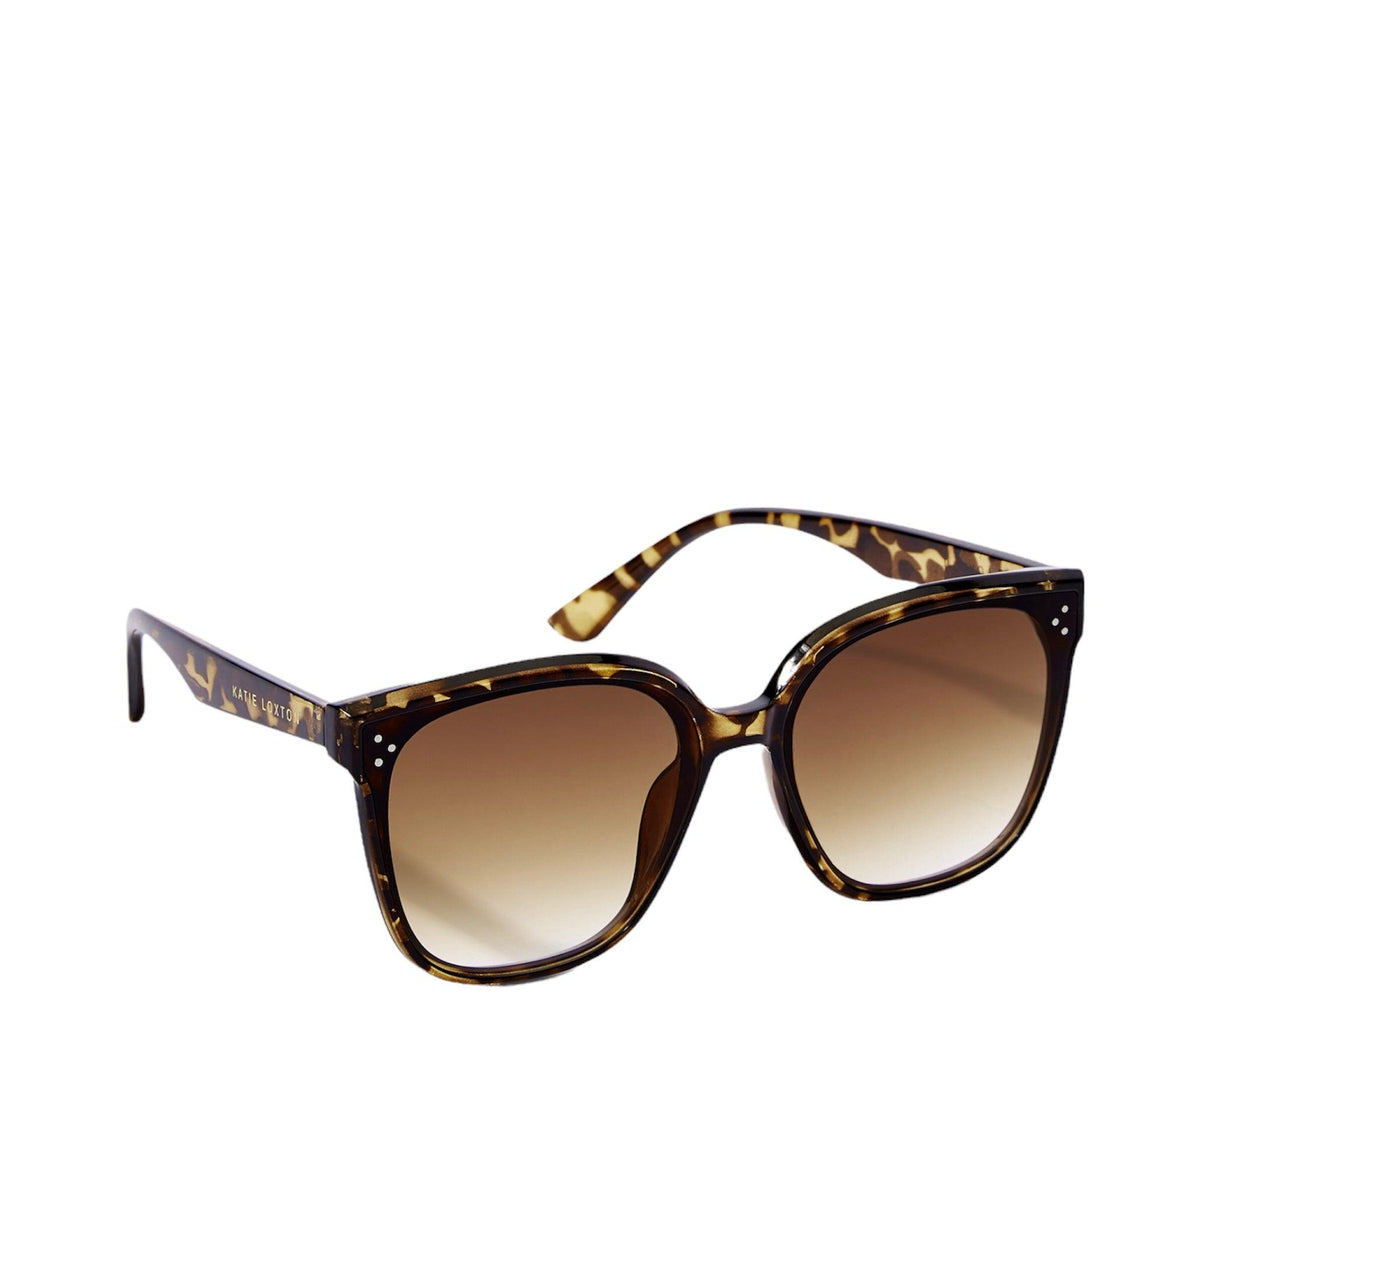 Large lens brown tortoiseshell frames with arms extended